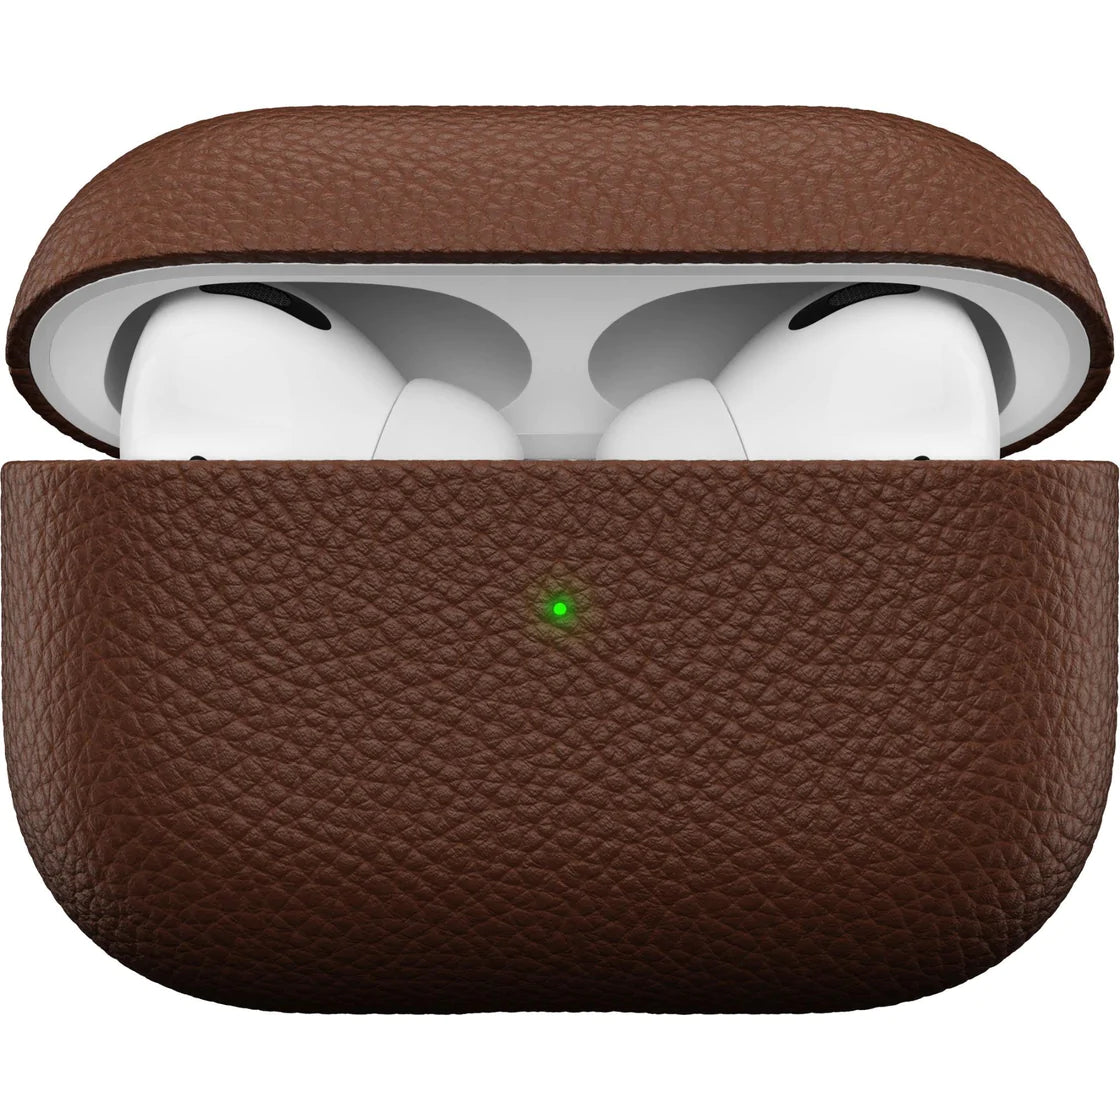 Keybudz Artisan Leather Case for Airpods Pro - Natural Brown